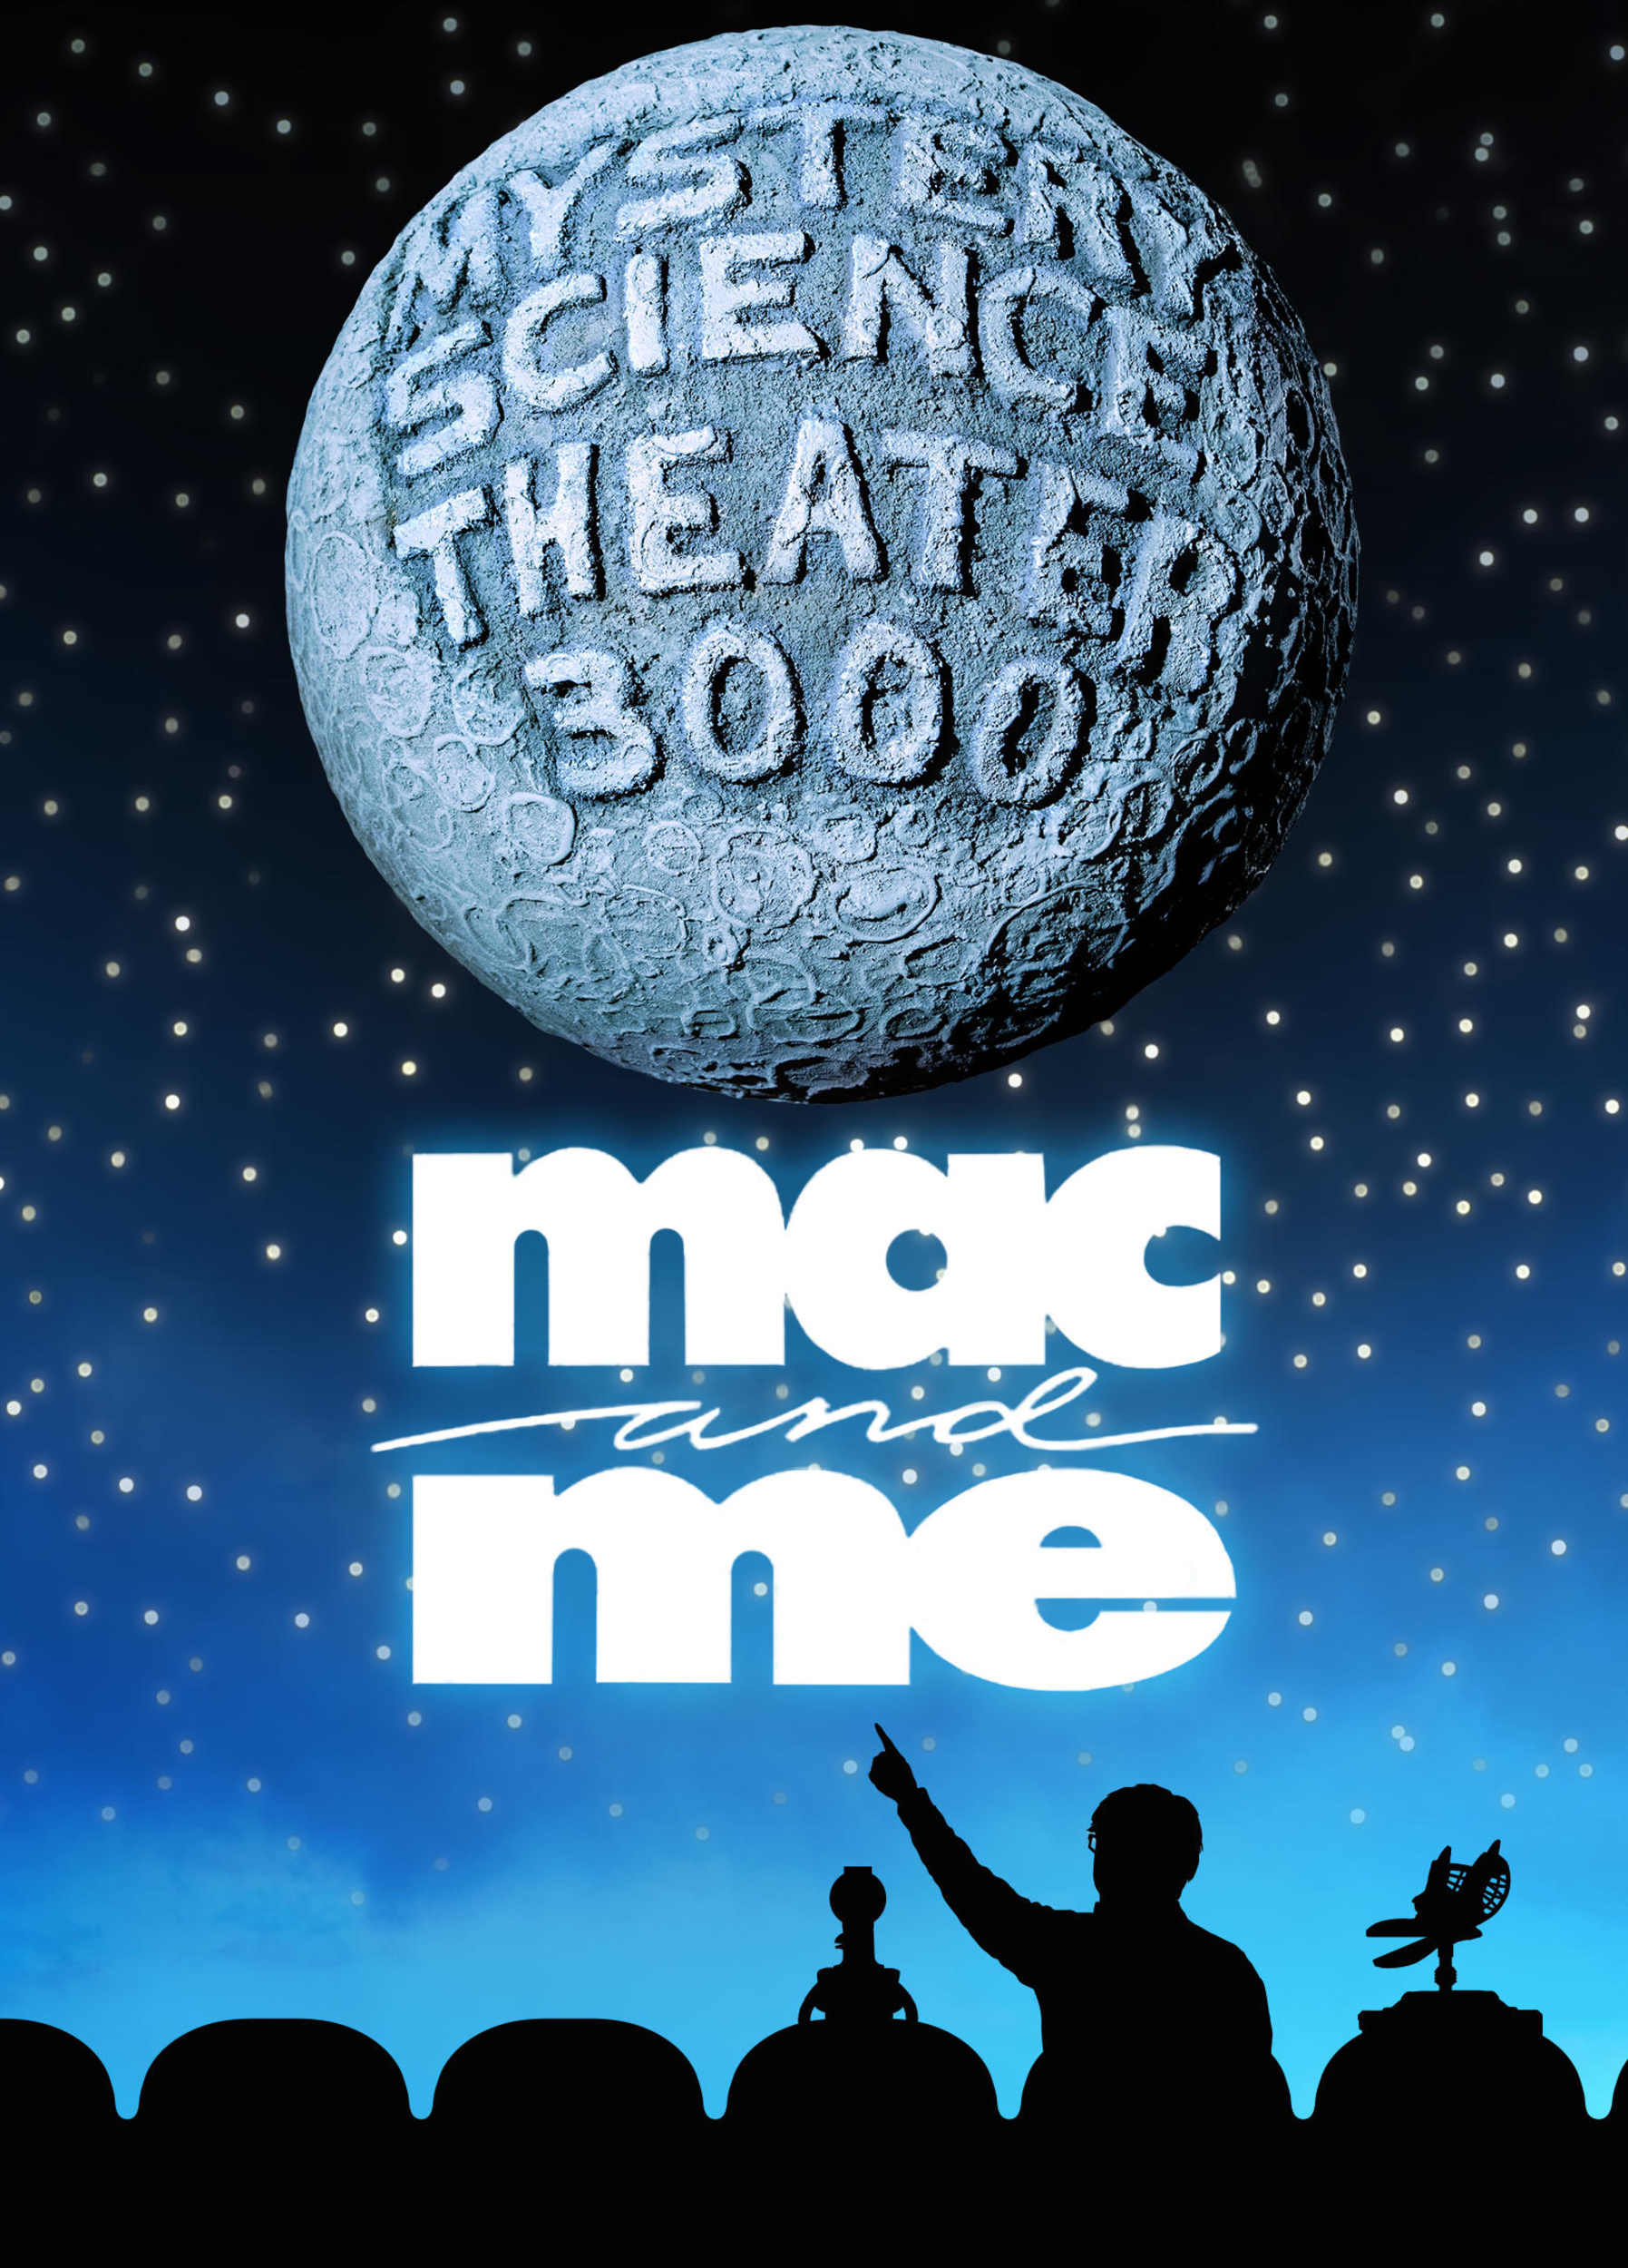 <p>We have the first of two episodes of the Netflix reboot of the show. A lot of people considered the “Mac and Me” episode an instant classic. That may be because it already had a reputation as a “so bad it’s good” movie well before “MST3K” got its hands on it. After all, Paul Rudd has been showing a scene from it on Conan O’Brien’s various shows for decades at this point.</p><p><a href='https://www.msn.com/en-us/community/channel/vid-cj9pqbr0vn9in2b6ddcd8sfgpfq6x6utp44fssrv6mc2gtybw0us'>Follow us on MSN to see more of our exclusive entertainment content.</a></p>